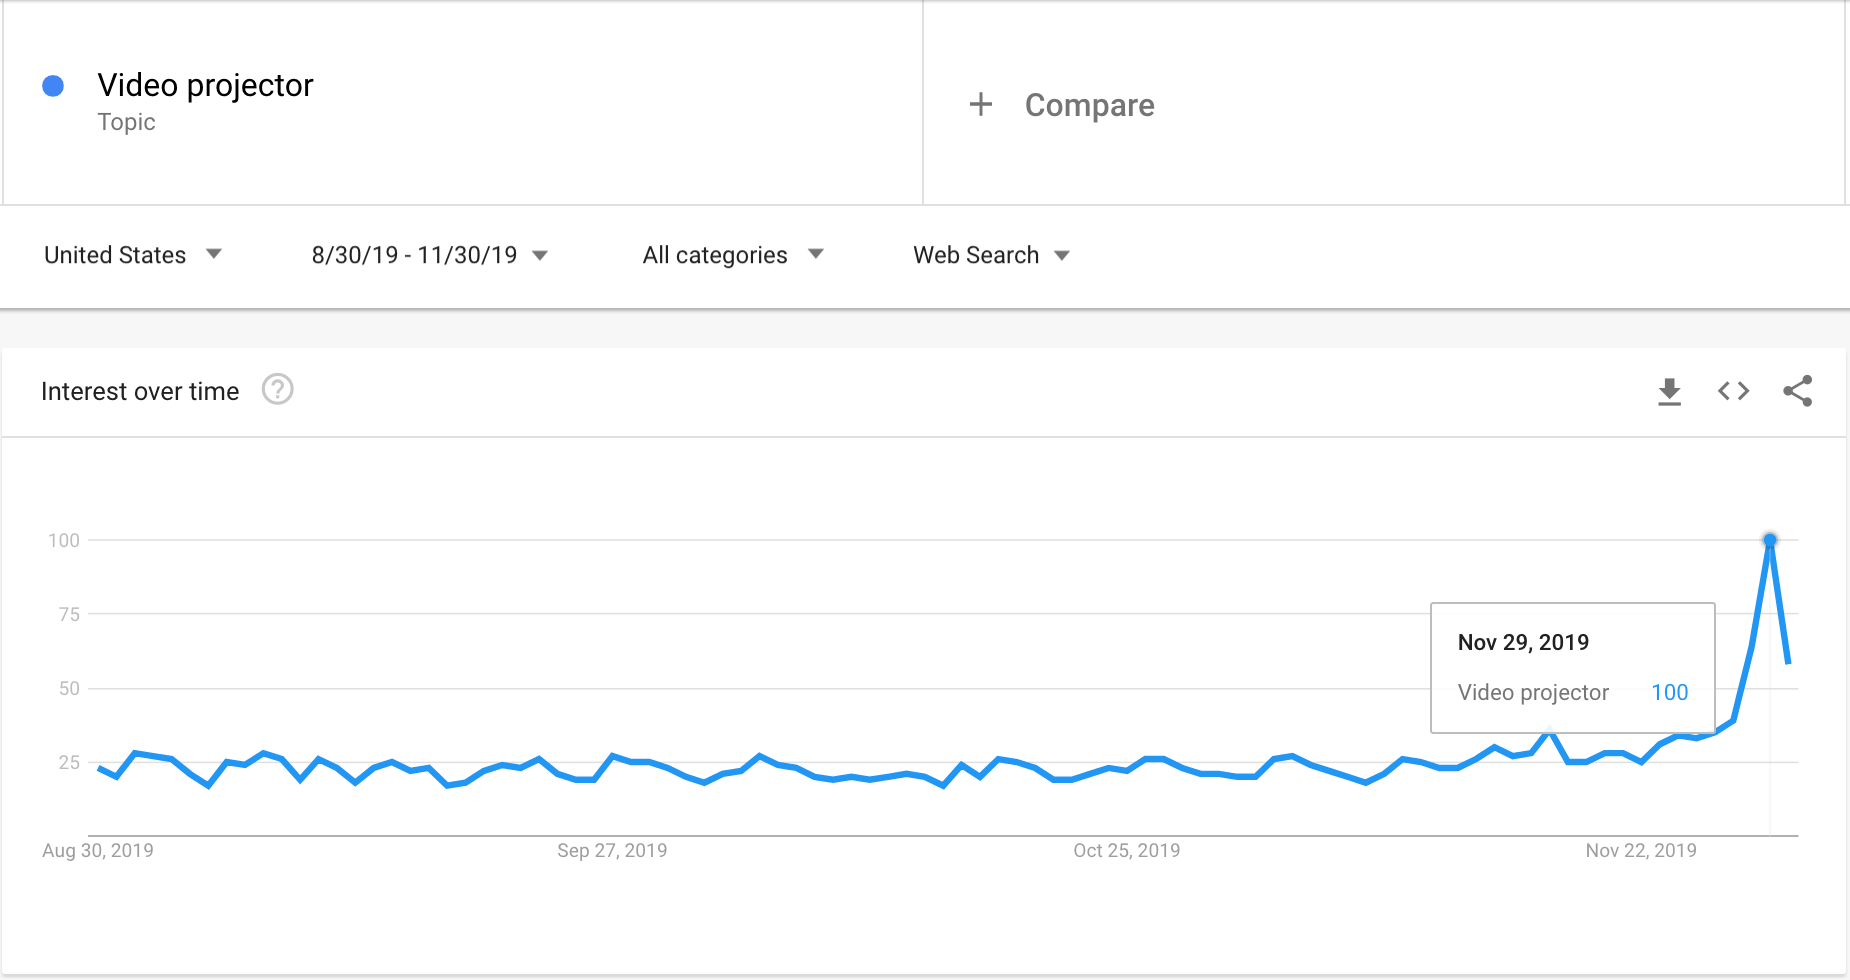 Google Trends graph showing the interest in video projectors